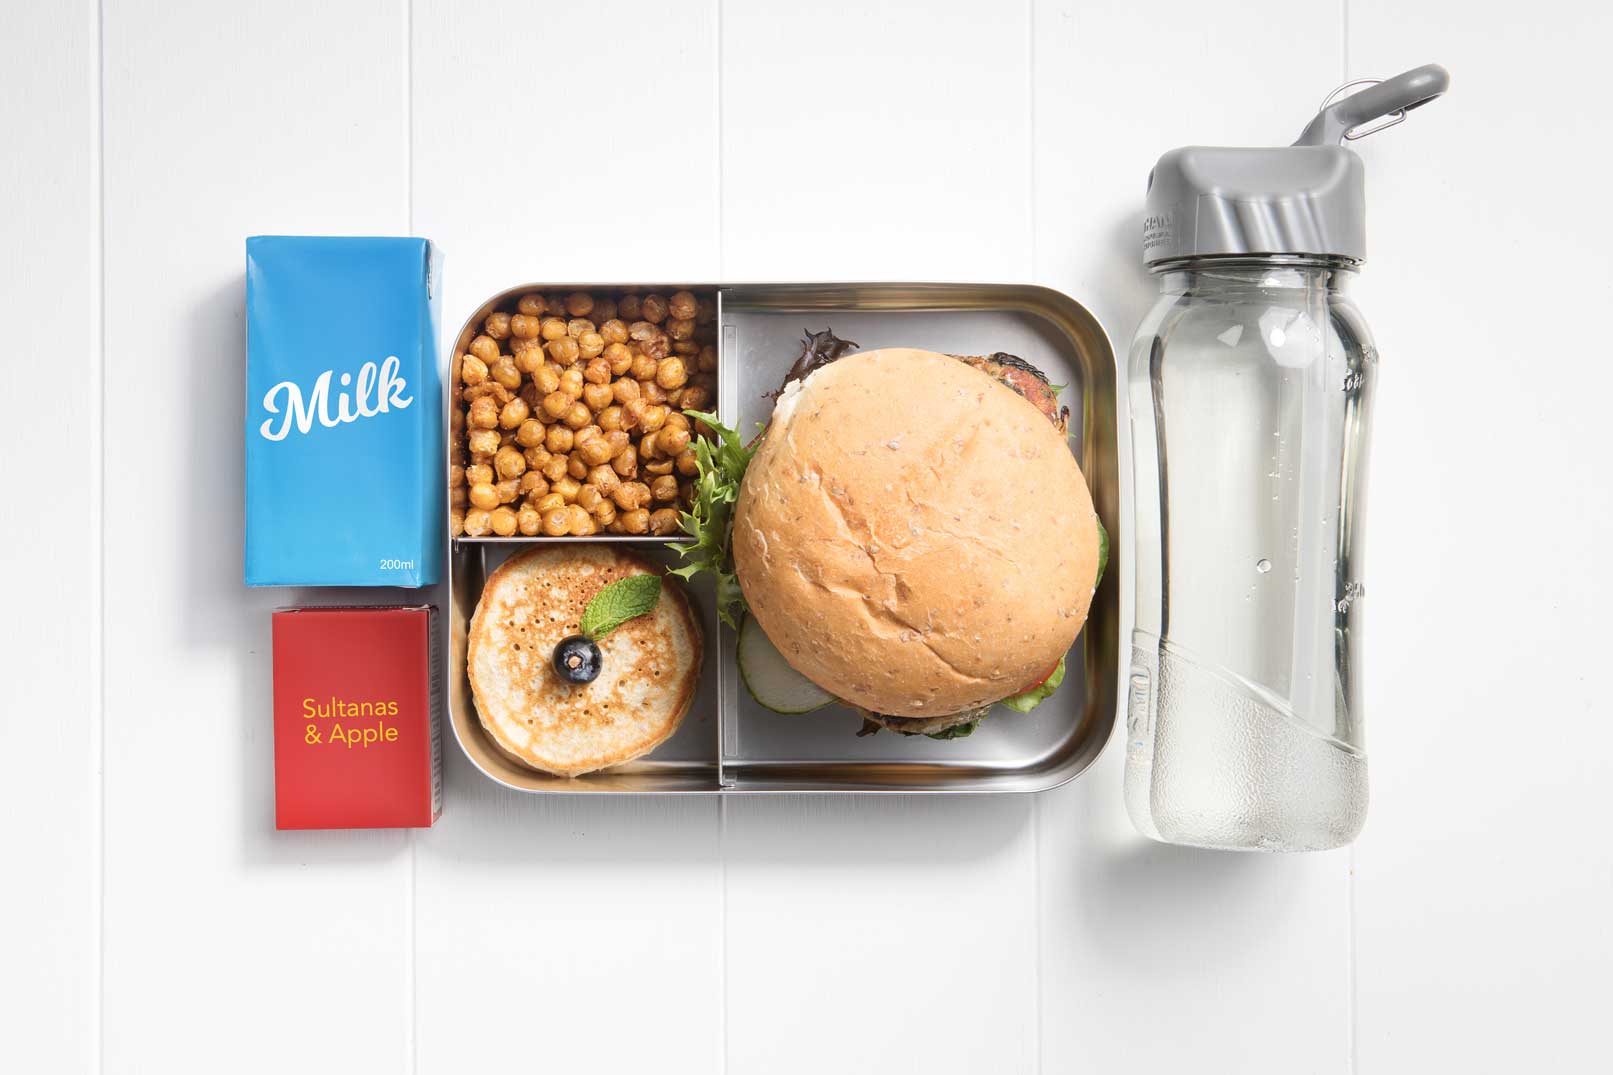 Top view of a packed lunch box with a roll, pikelets, roasted chickpeas, milk popper, container of sultanas and apple and a water bottle.